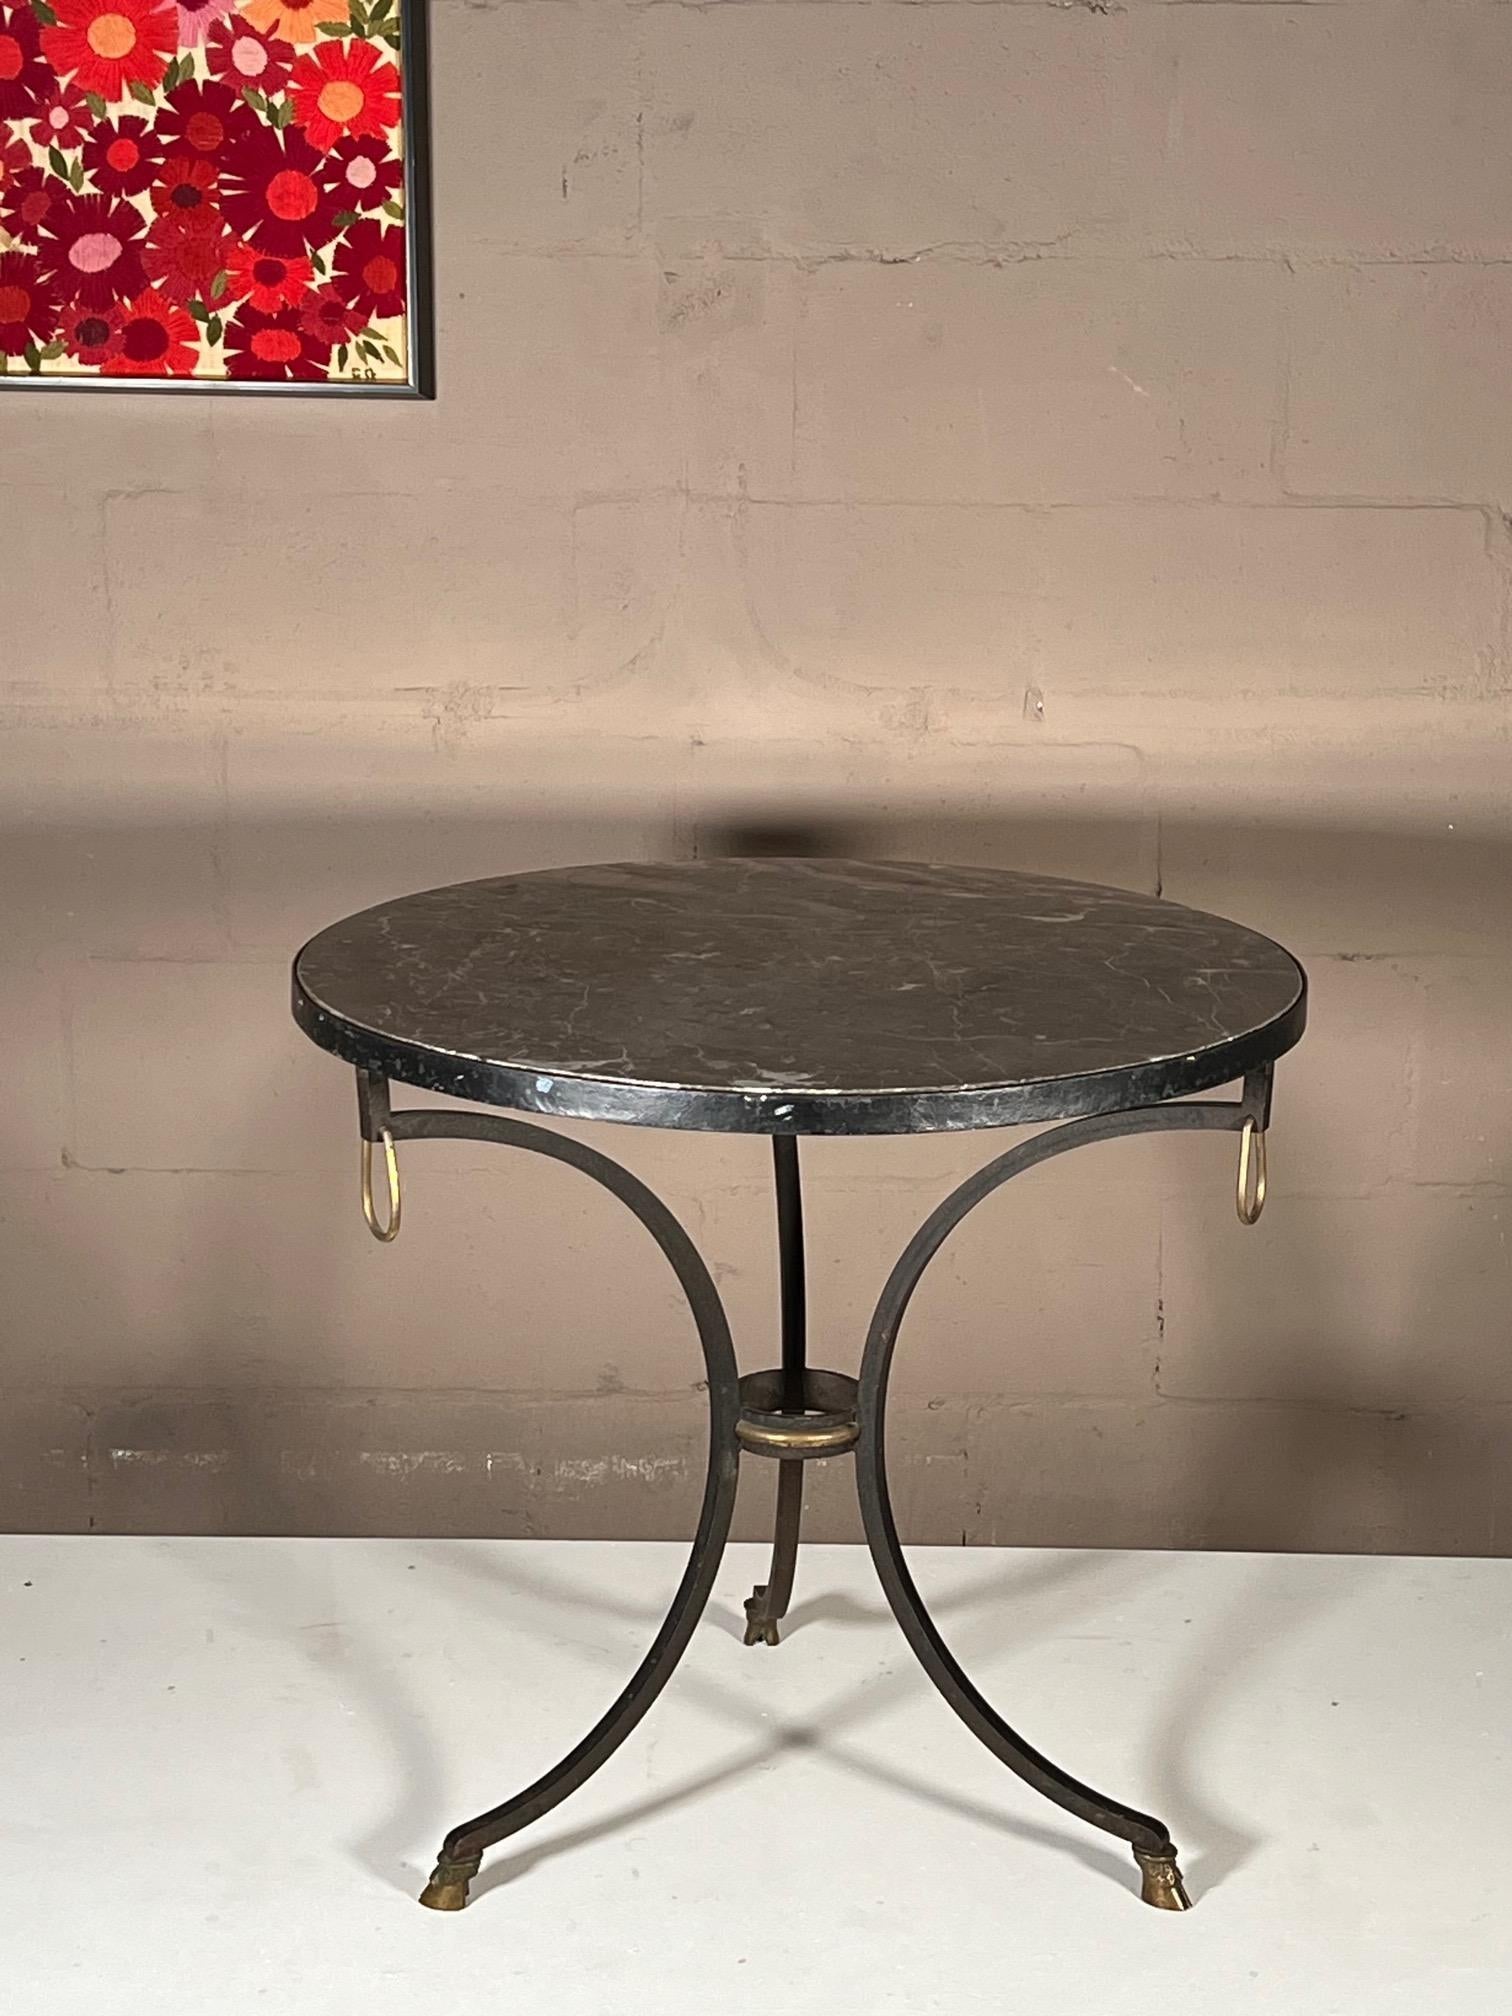 Rare and unusual gueridon (three legged) wrought iron table with a beautiful gray stone top. Designed by Yale R.Burge who was the first president of the National Society of Interior Decorators. Mr. Burge was a partner in the design firm of Burge‐